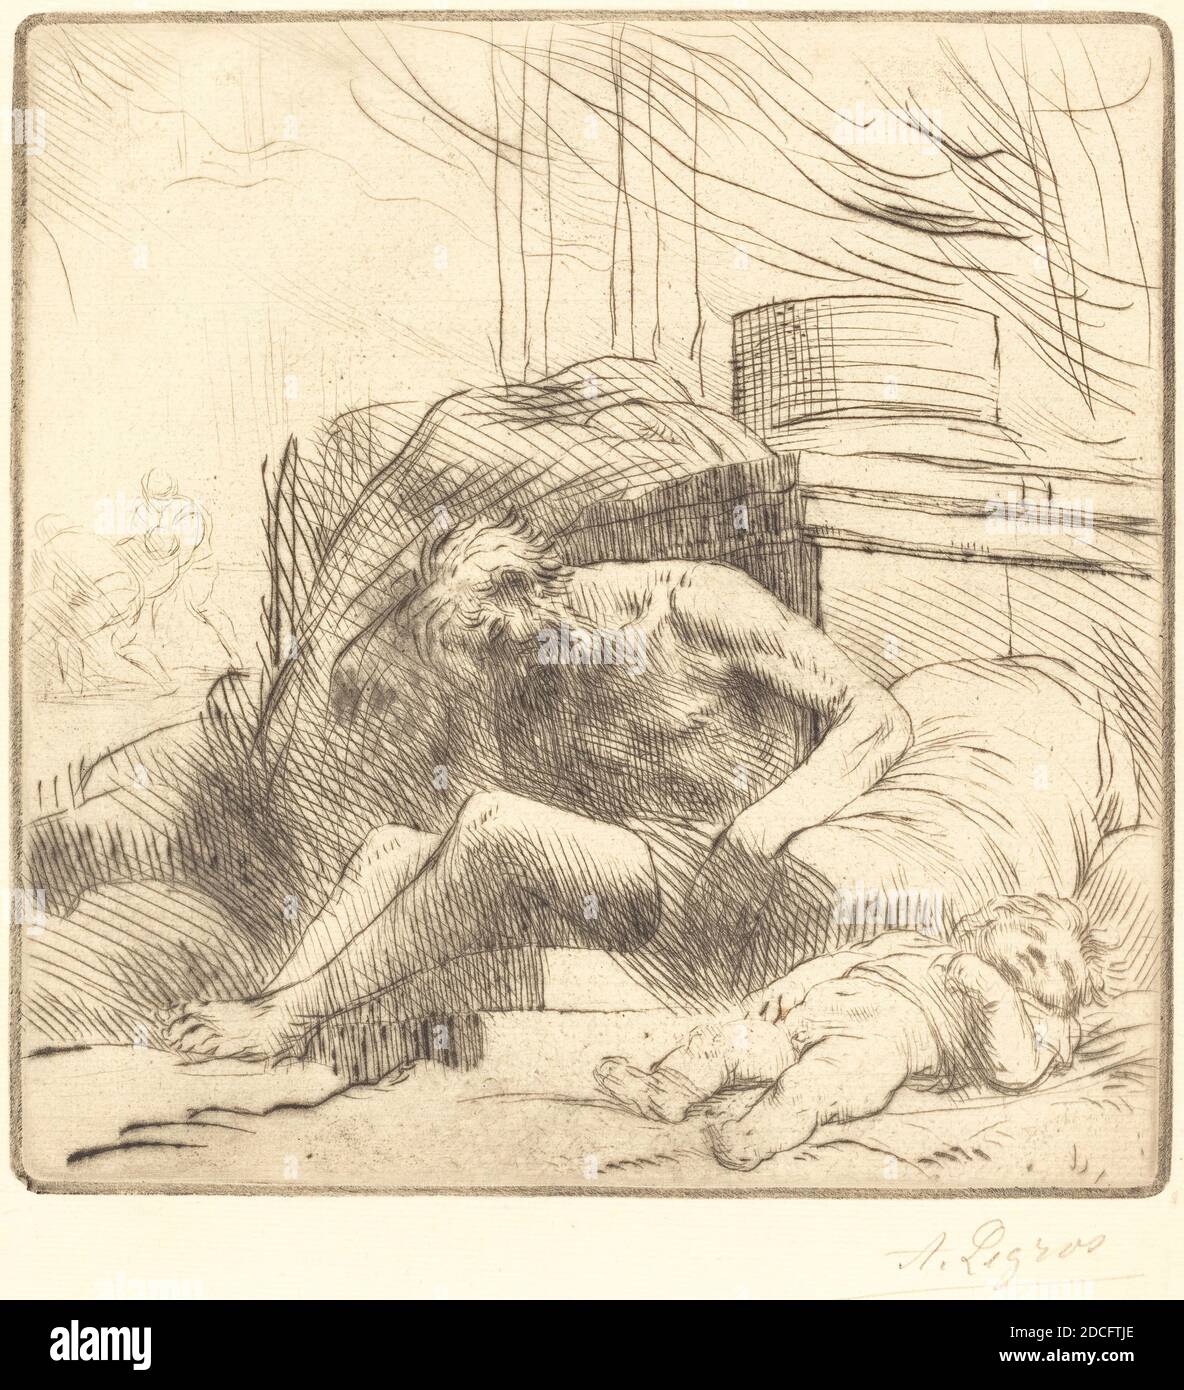 Alphonse Legros, (artist), French, 1837 - 1911, Victim of a Fire (Victime d'un incendie), drypoint Stock Photo